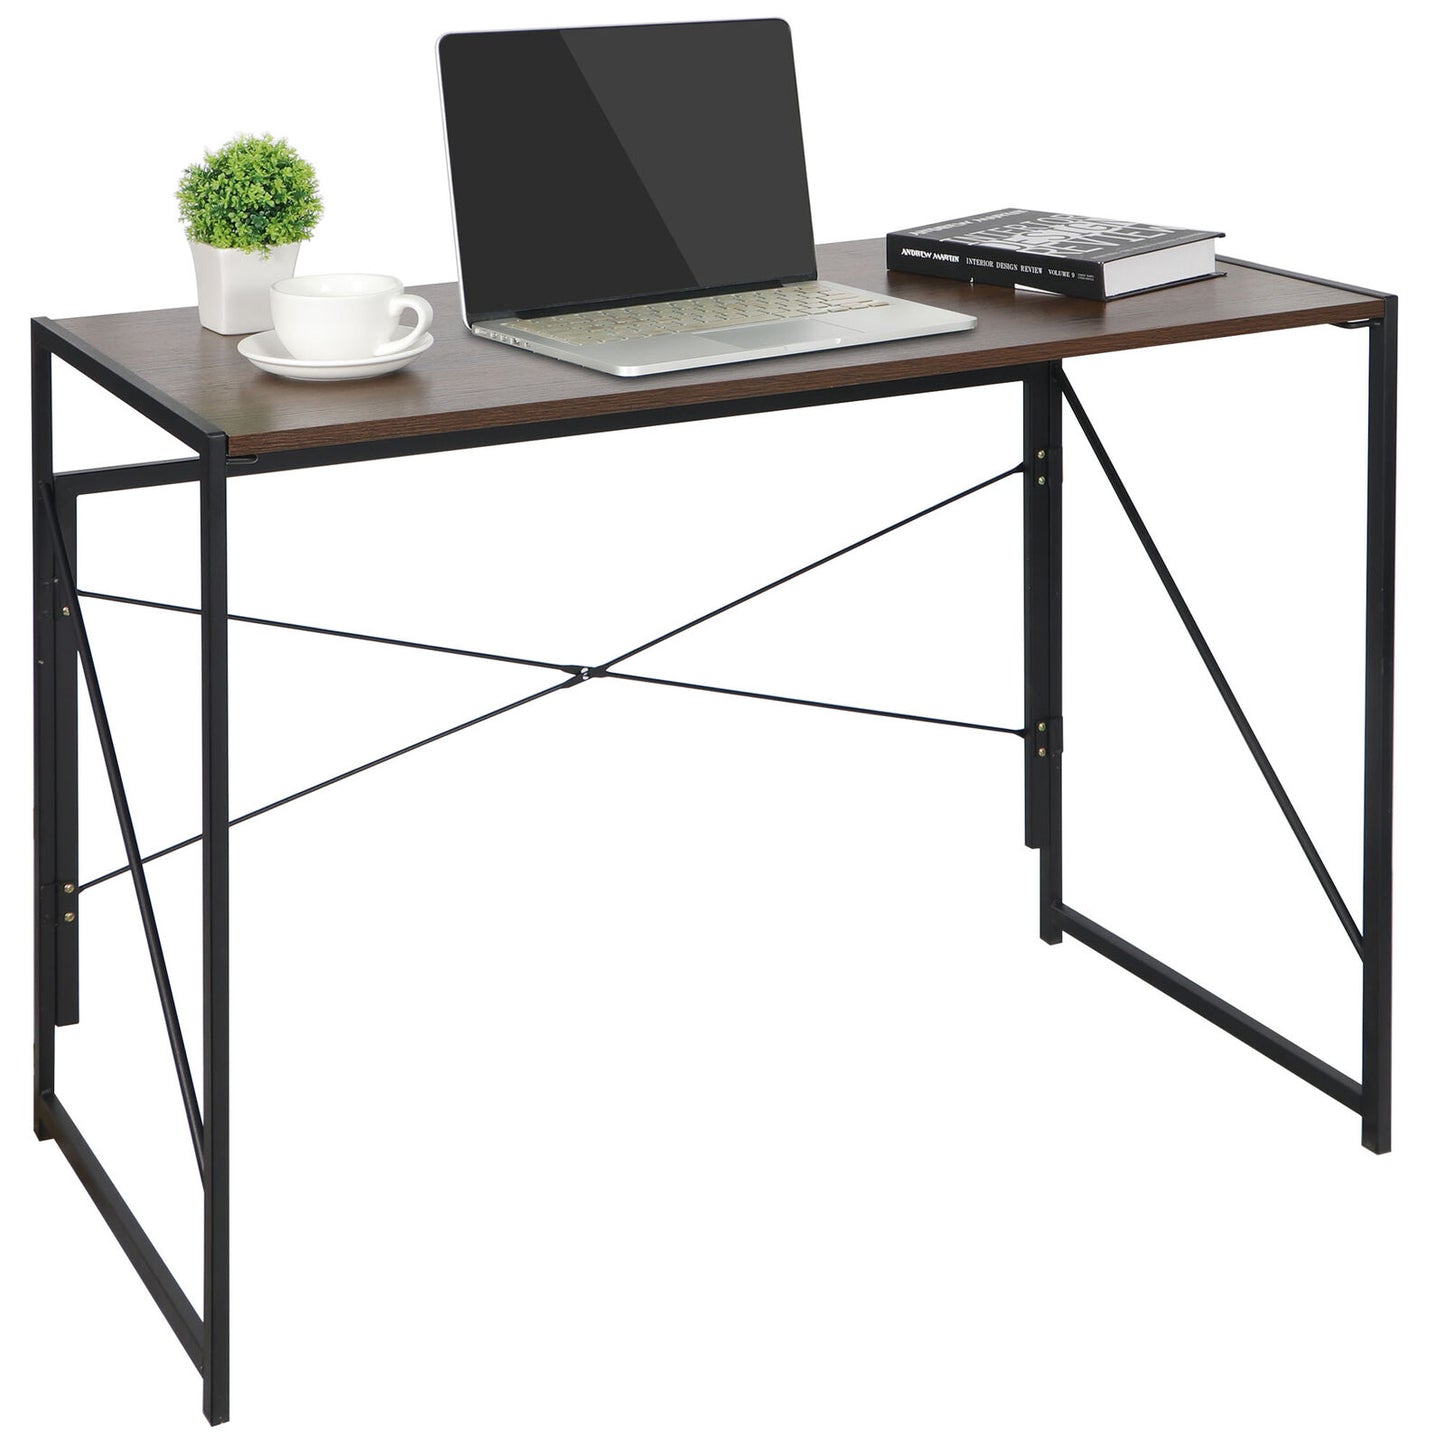 Folding Computer Writing Desk Wood and Metal Frame Study PC Laptop Table Brown